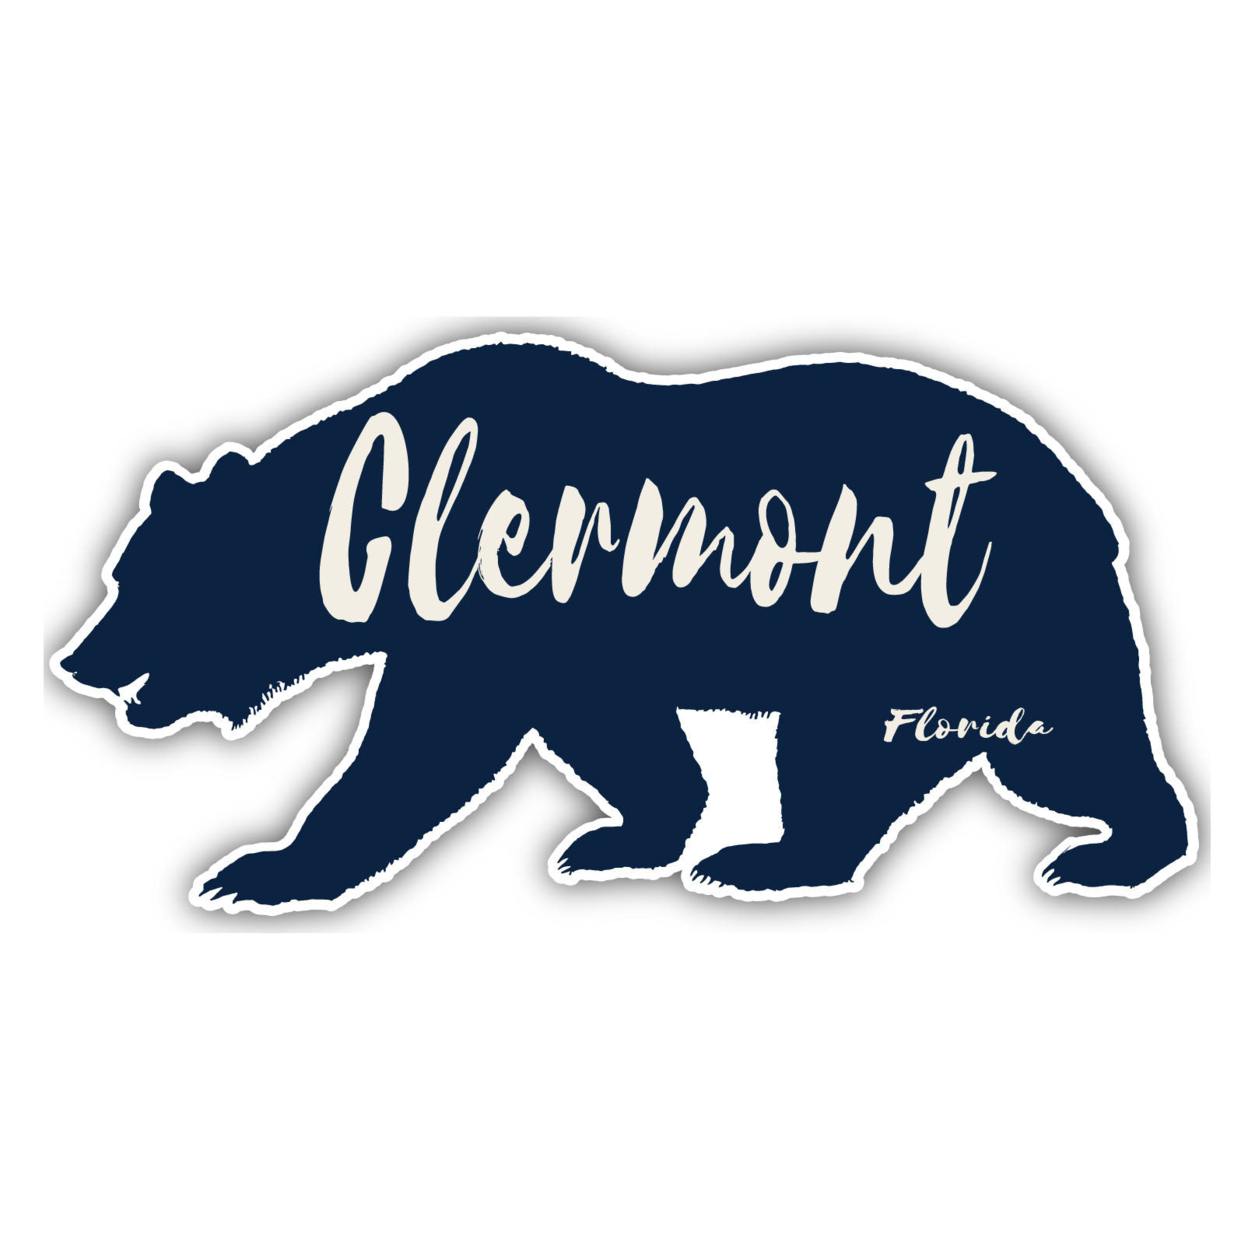 Clermont Florida Souvenir Decorative Stickers (Choose Theme And Size) - 4-Pack, 12-Inch, Bear